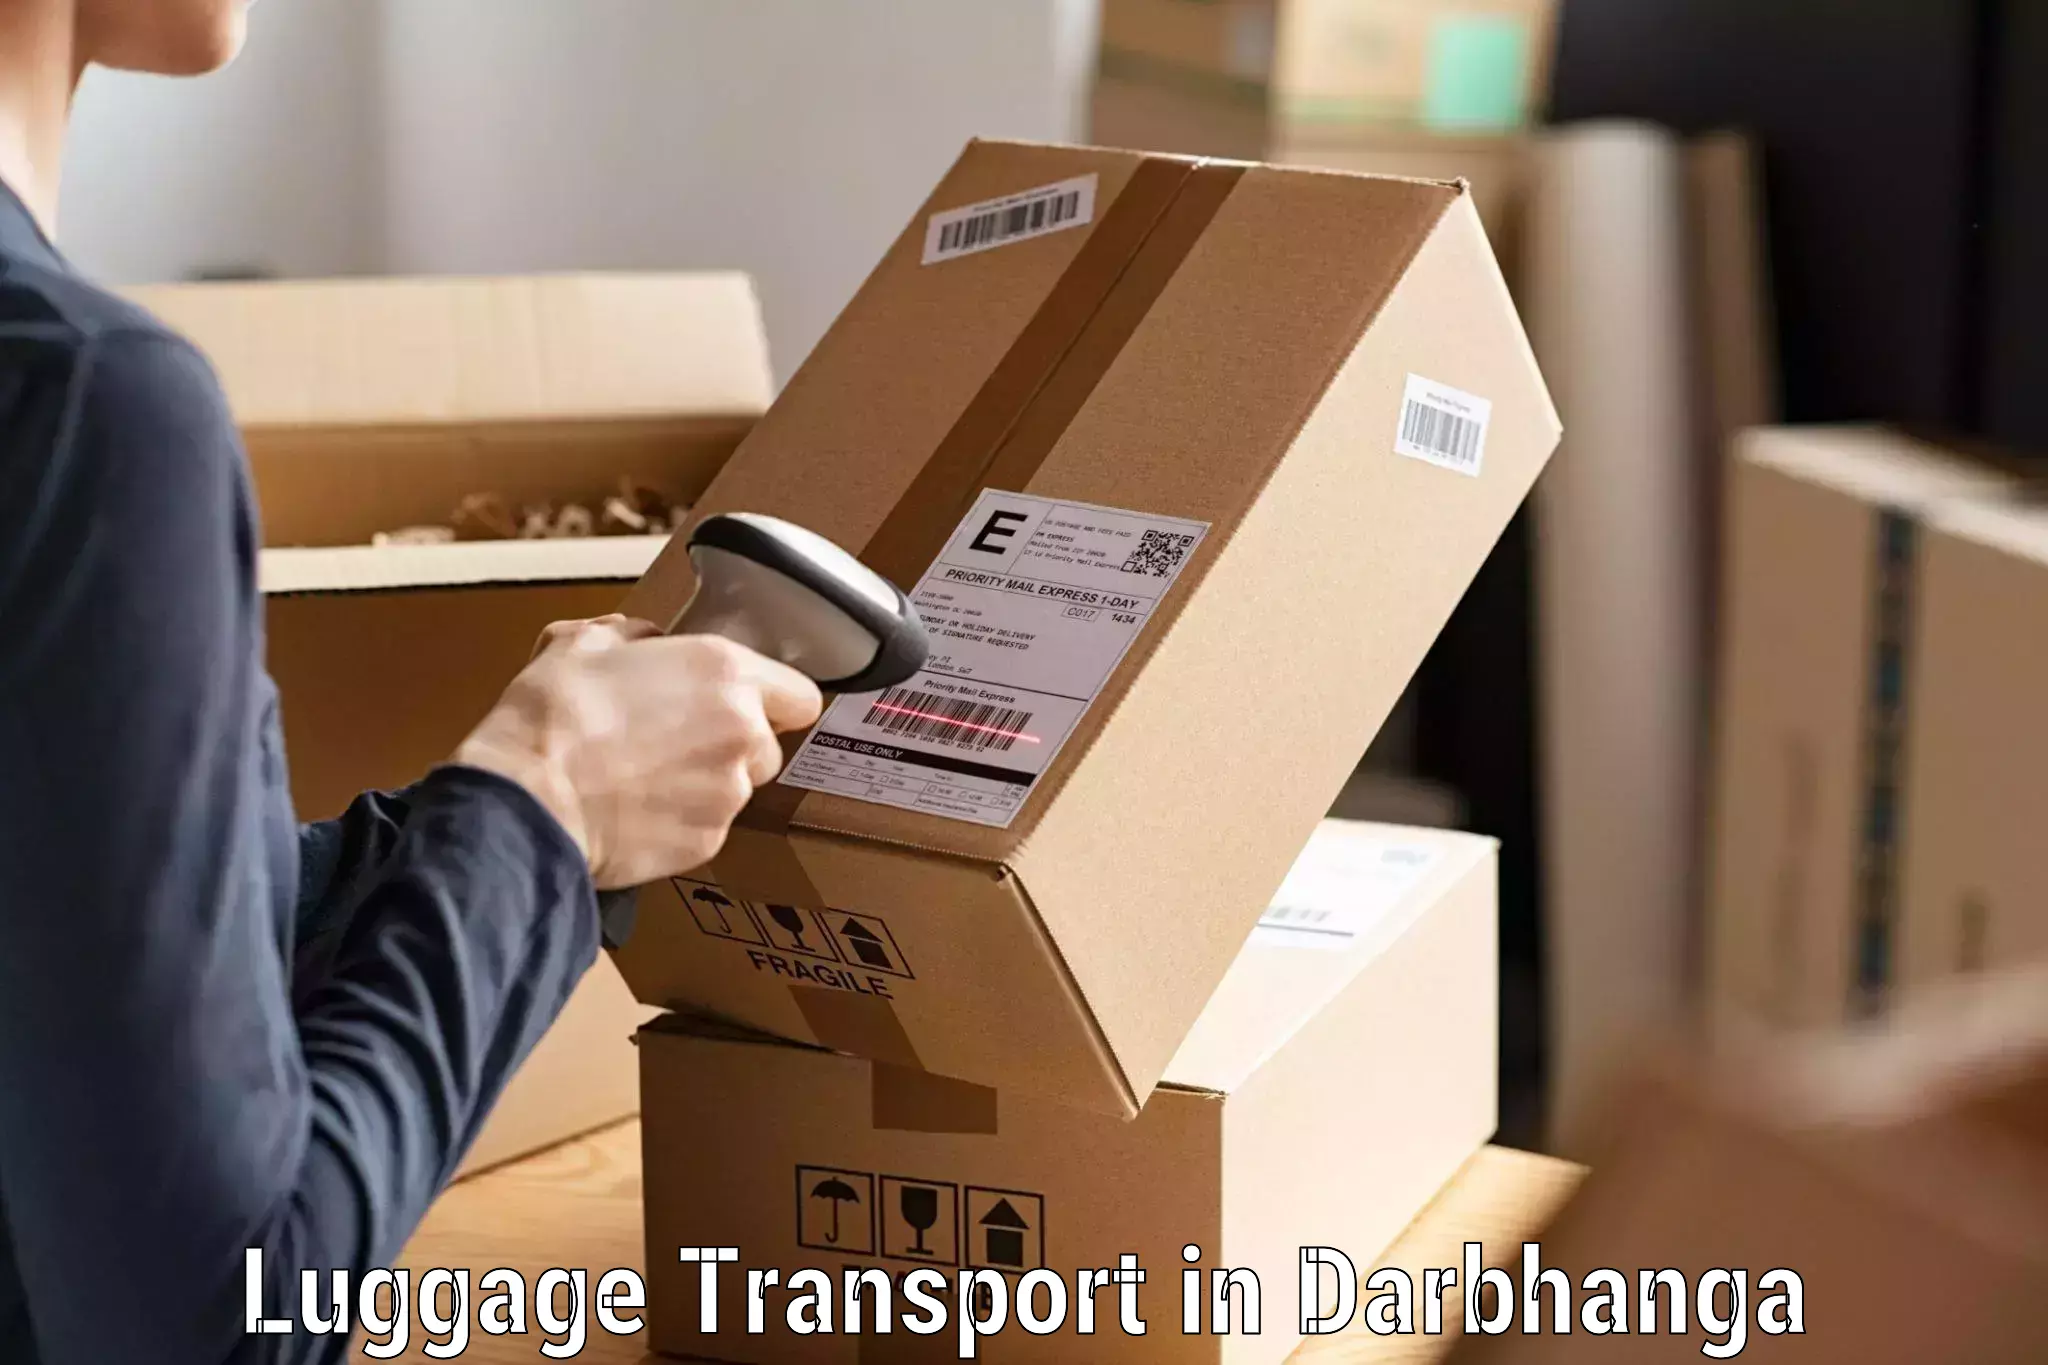 Luggage delivery estimate in Darbhanga